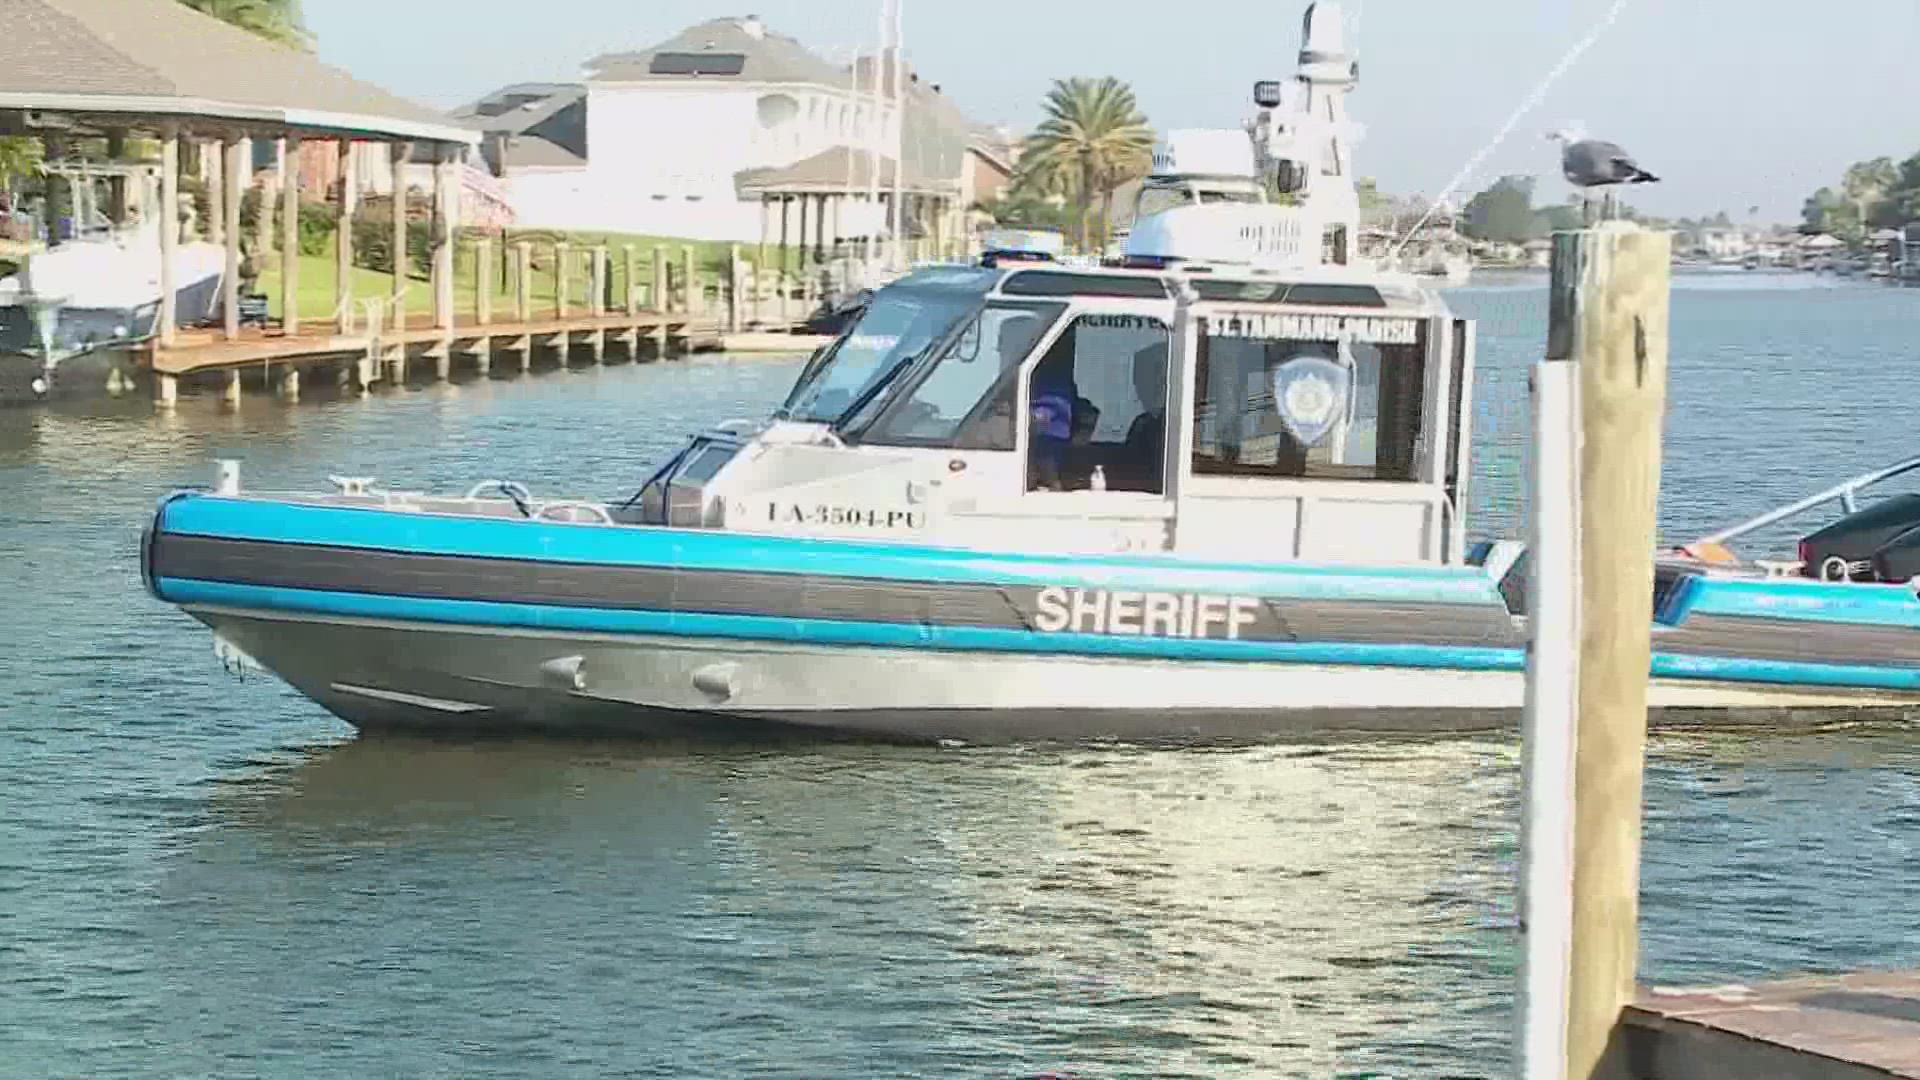 An overnight fishing trip ended in tragedy for a family in Slidell after multiple first responders searched Lake Pontchartrain for two missing men.